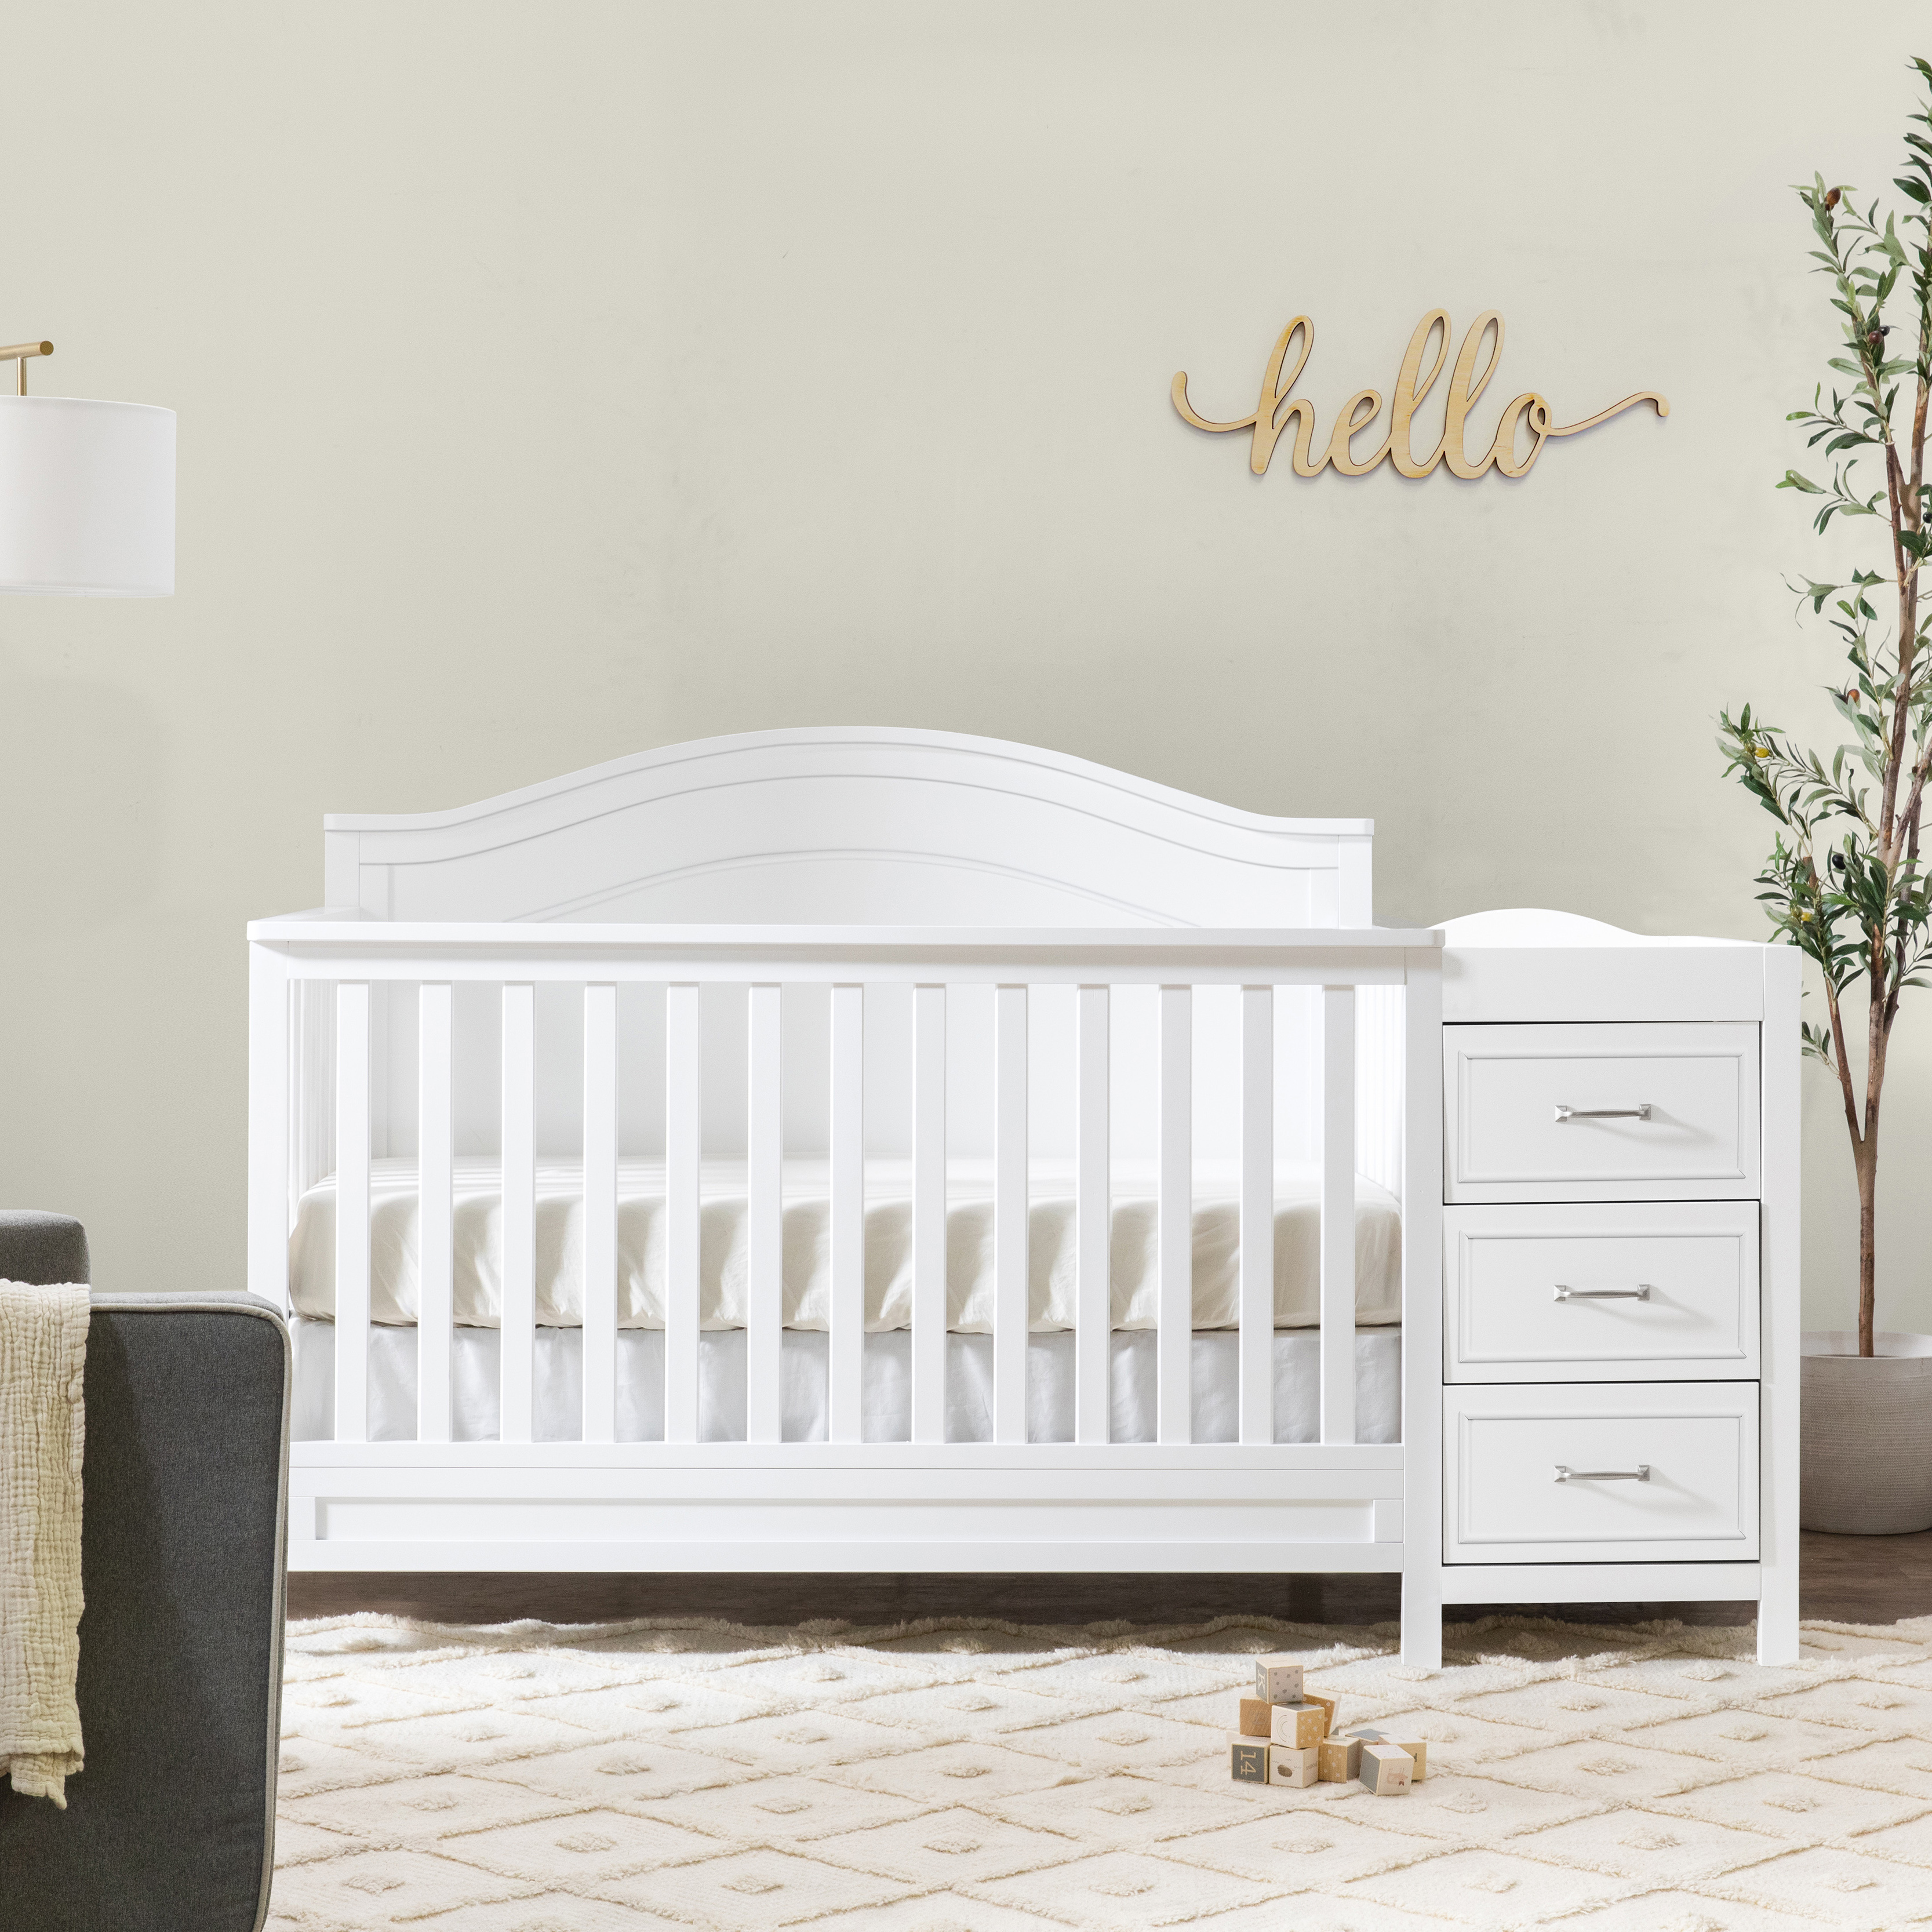 DaVinci Charlie 4-in-1 Convertible Crib and Changer Combo in White - image 2 of 11